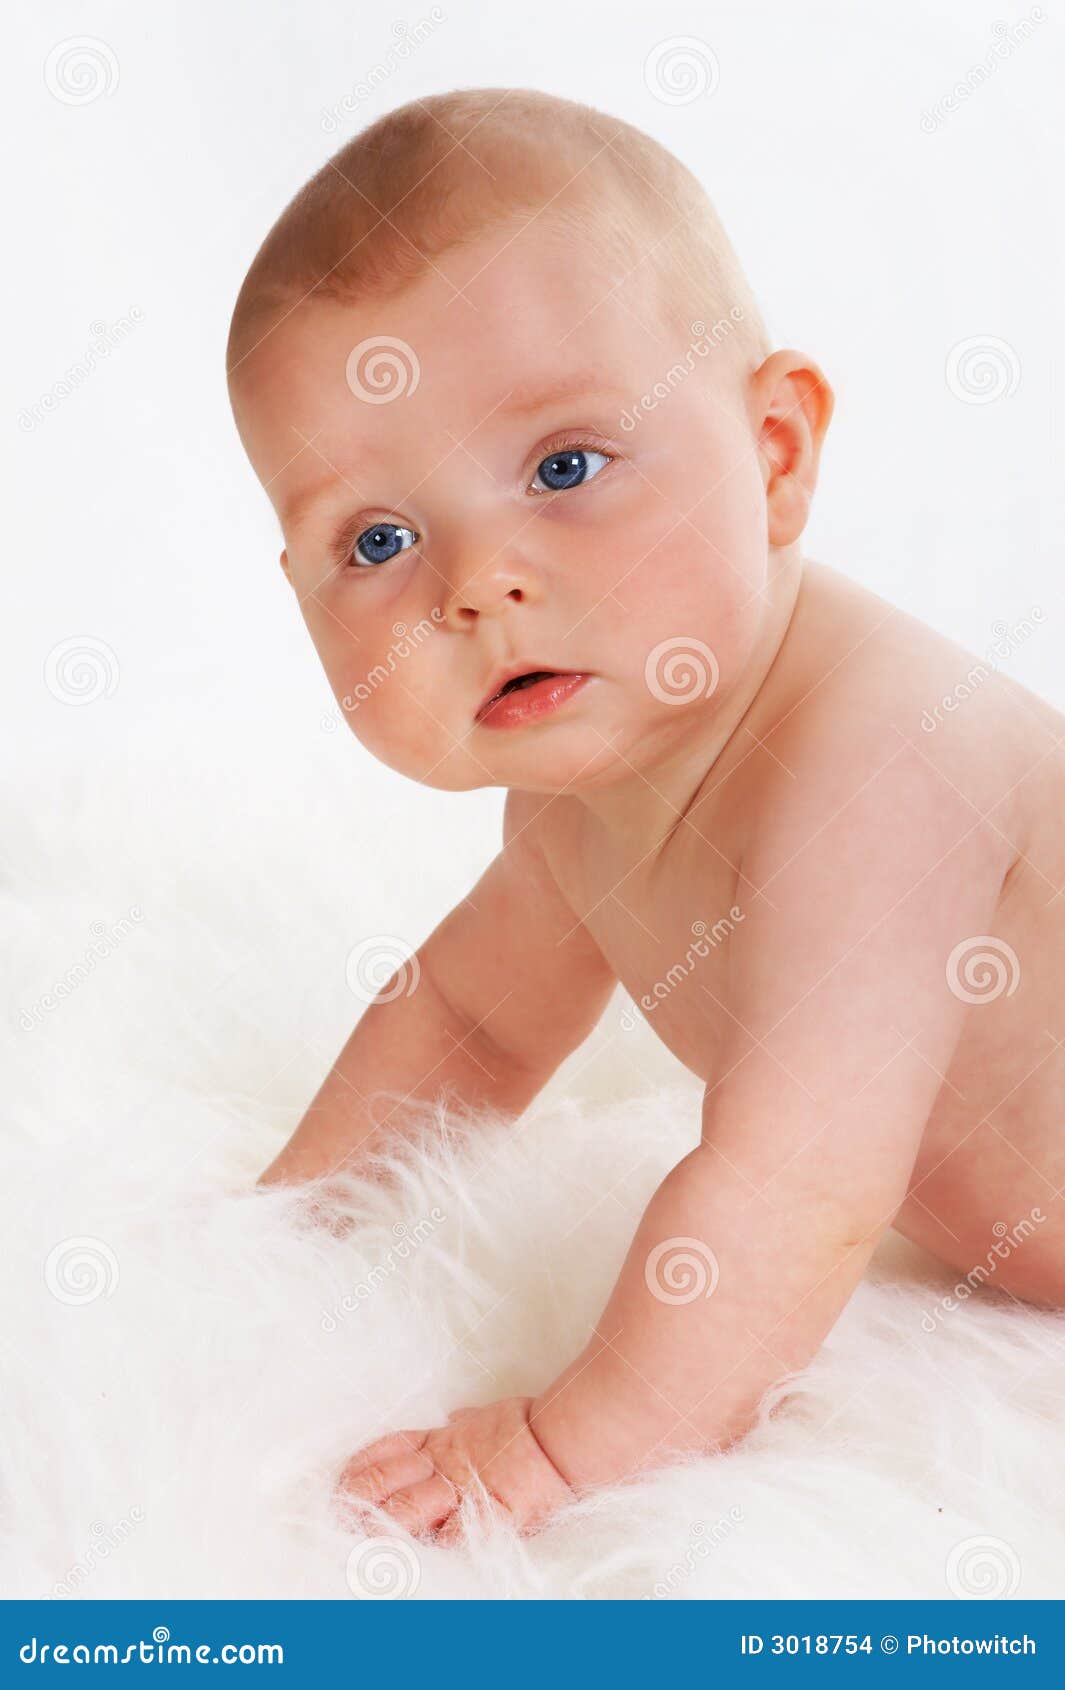 Baby push up stock photo. Image of cute, baby, arms, nappy ...